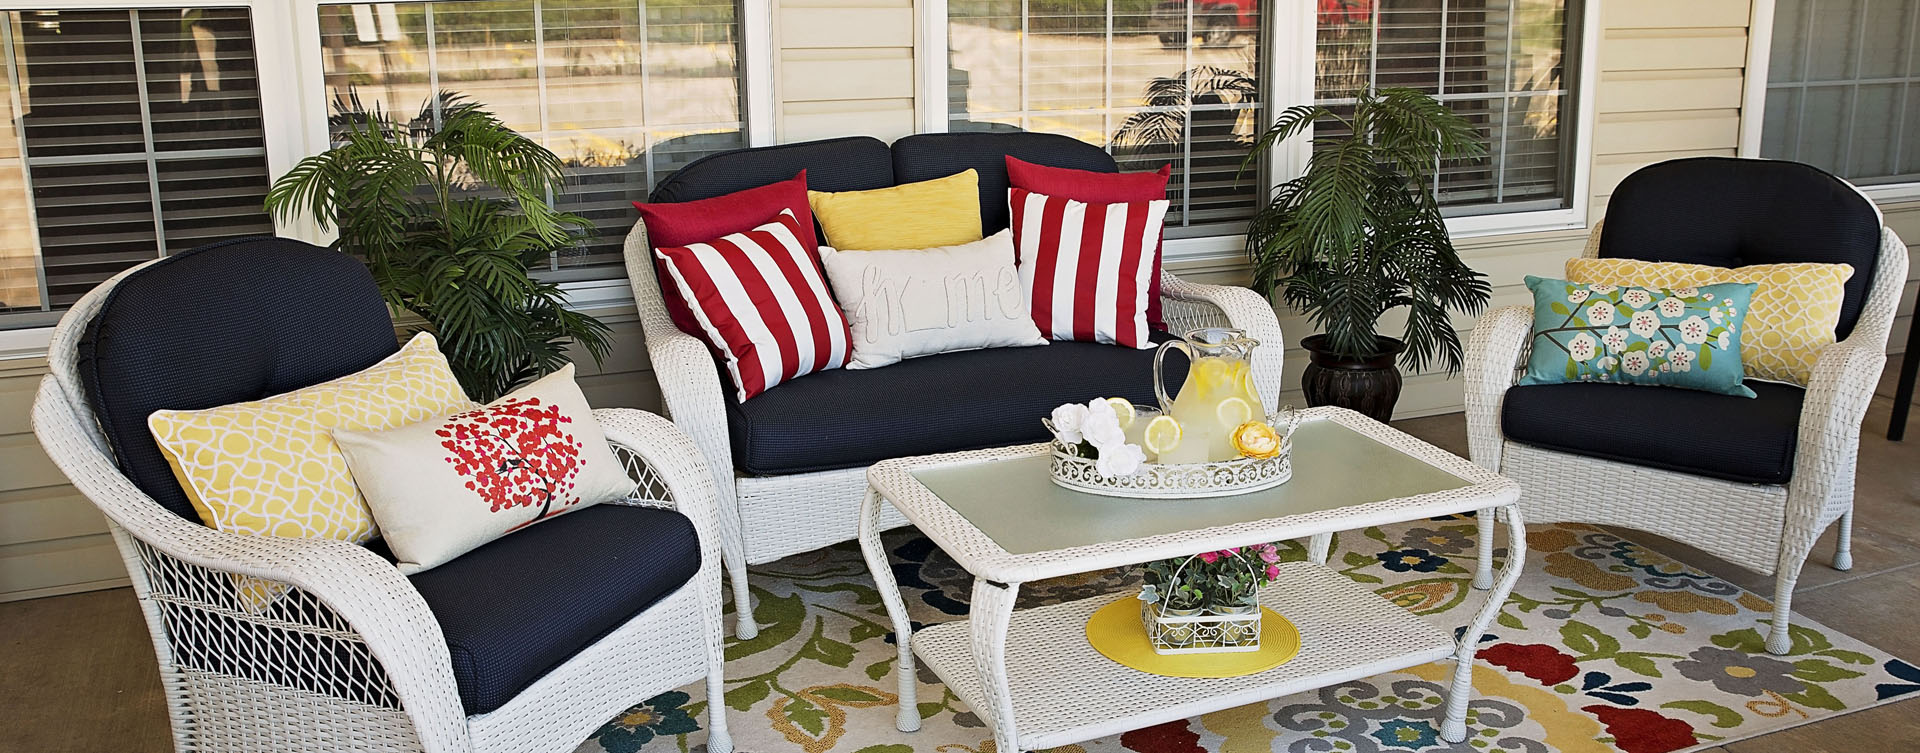 Enjoy conversations with friends on the porch at Bickford of Grand Island